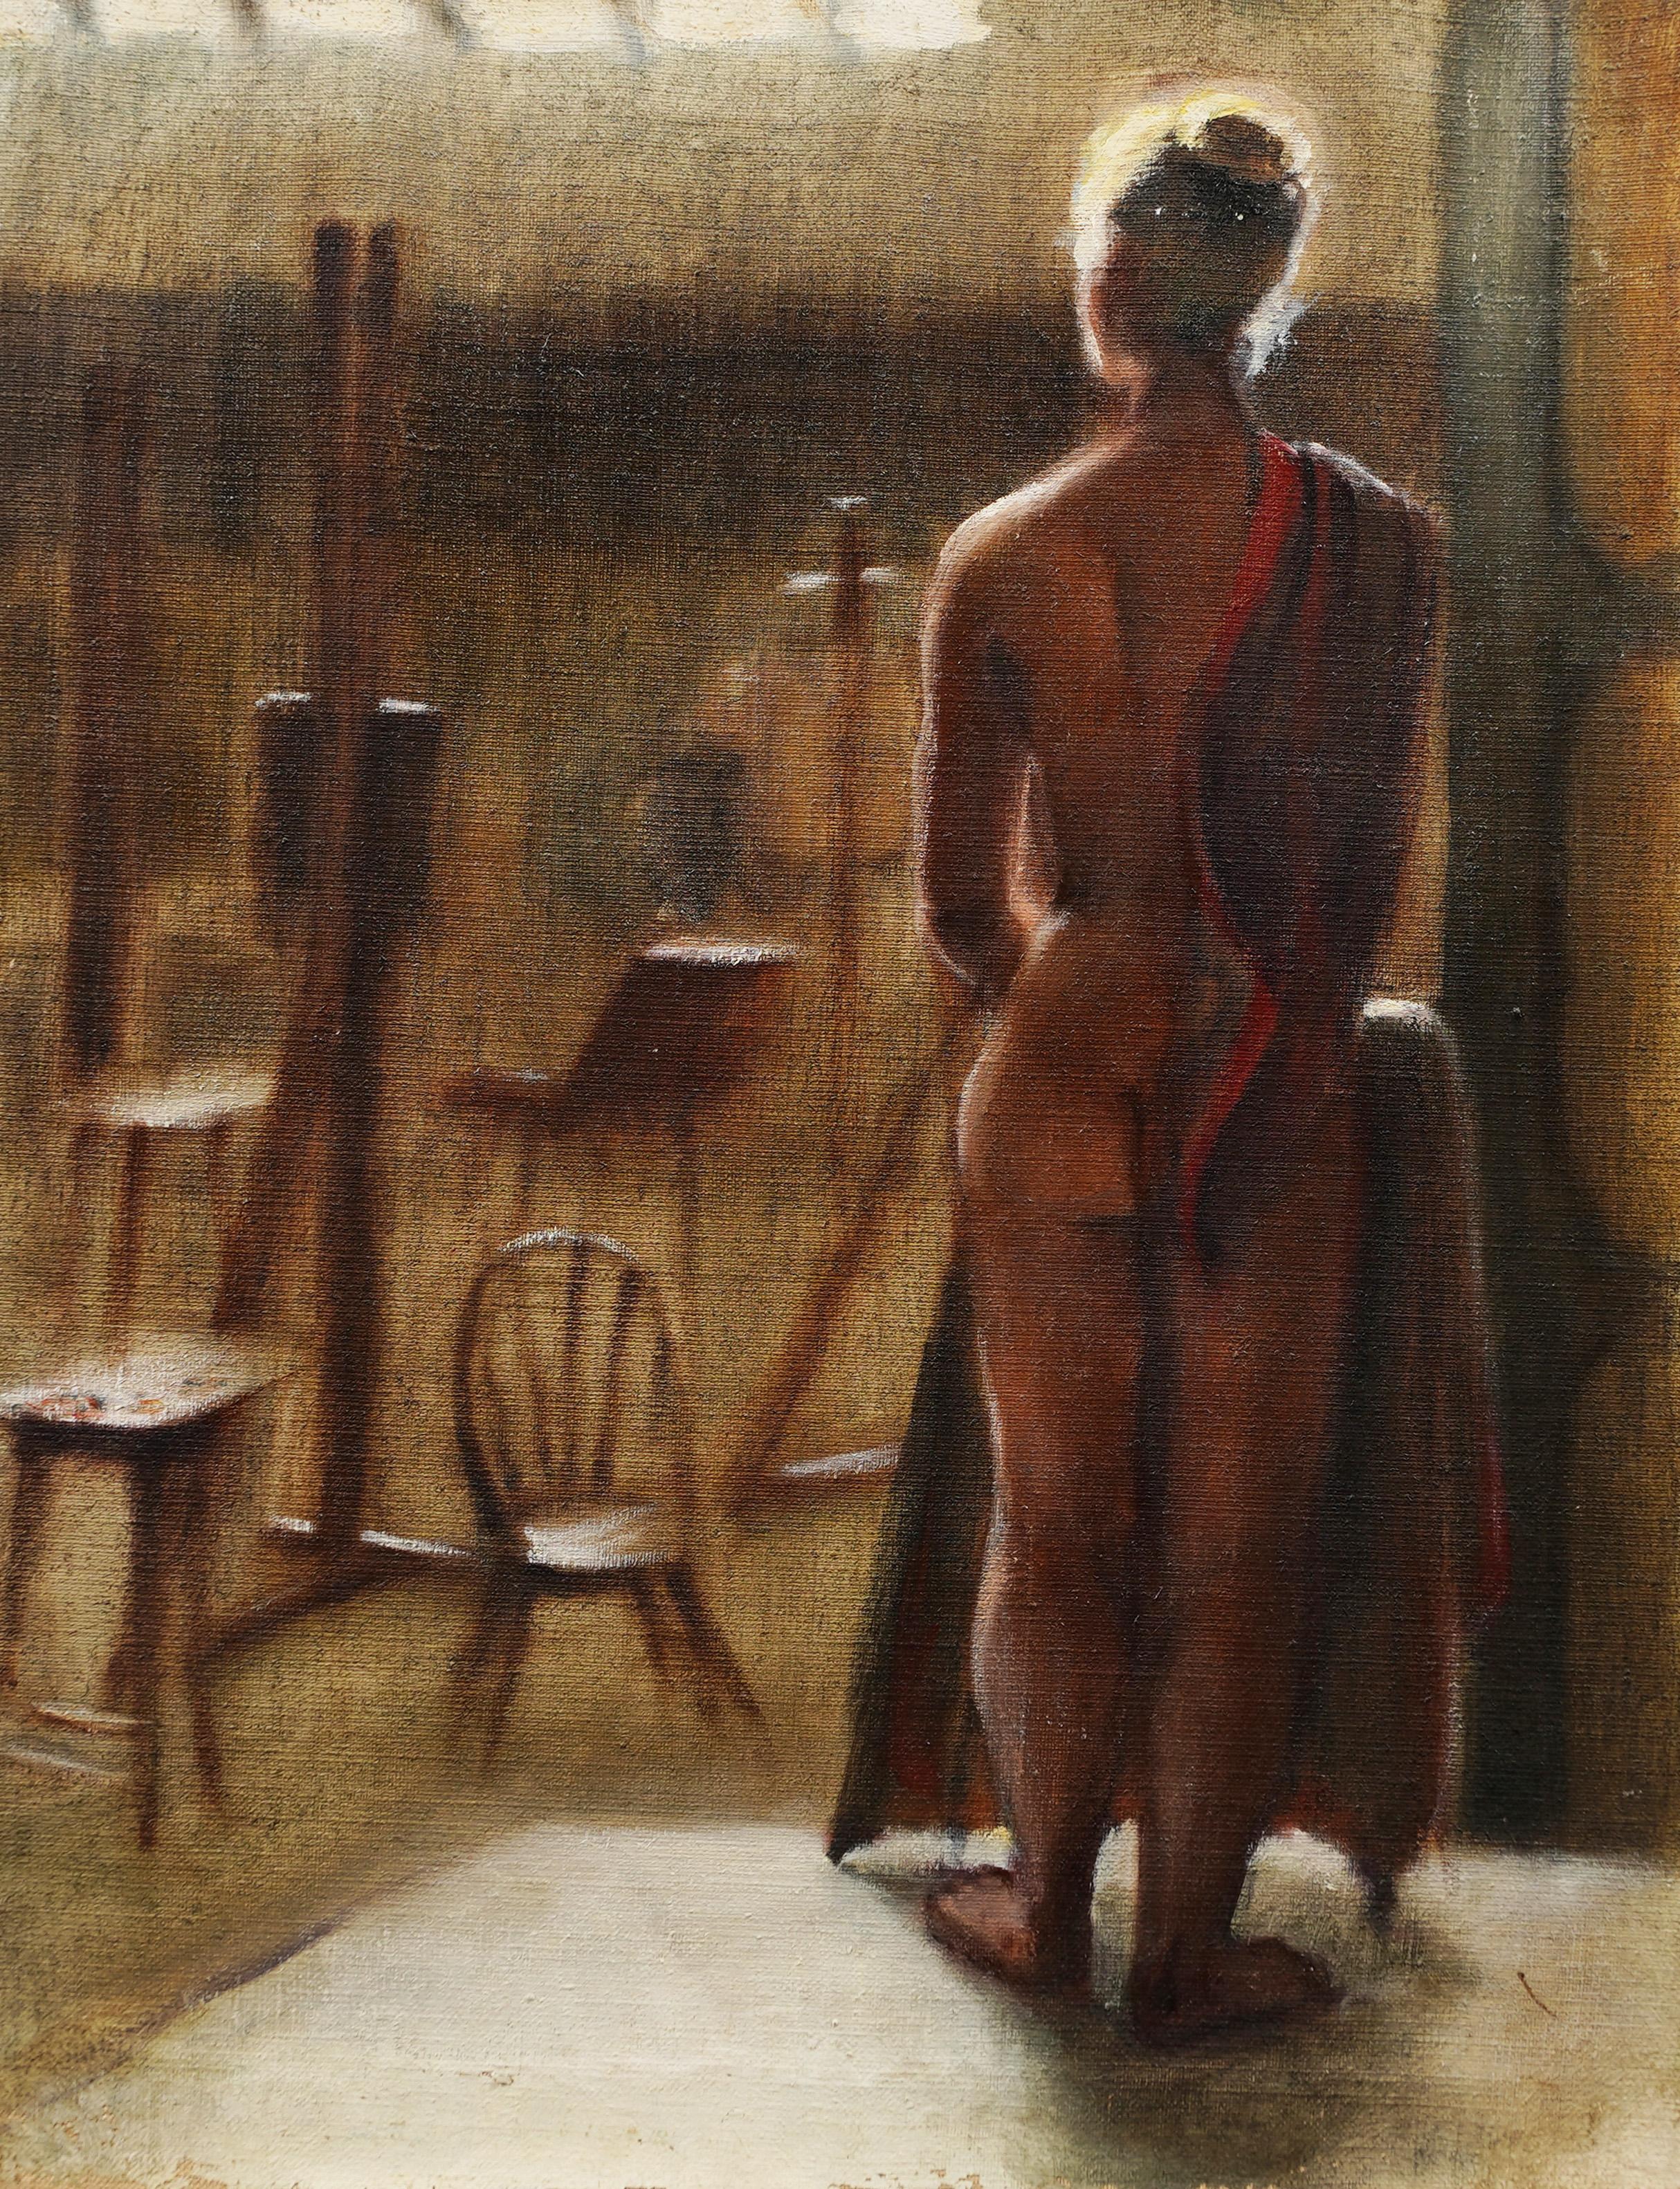 Antique American modernist interior scene with a nude woman oil painting.  Oil on canvas.  Framed.  Image size, 22L x 26H.